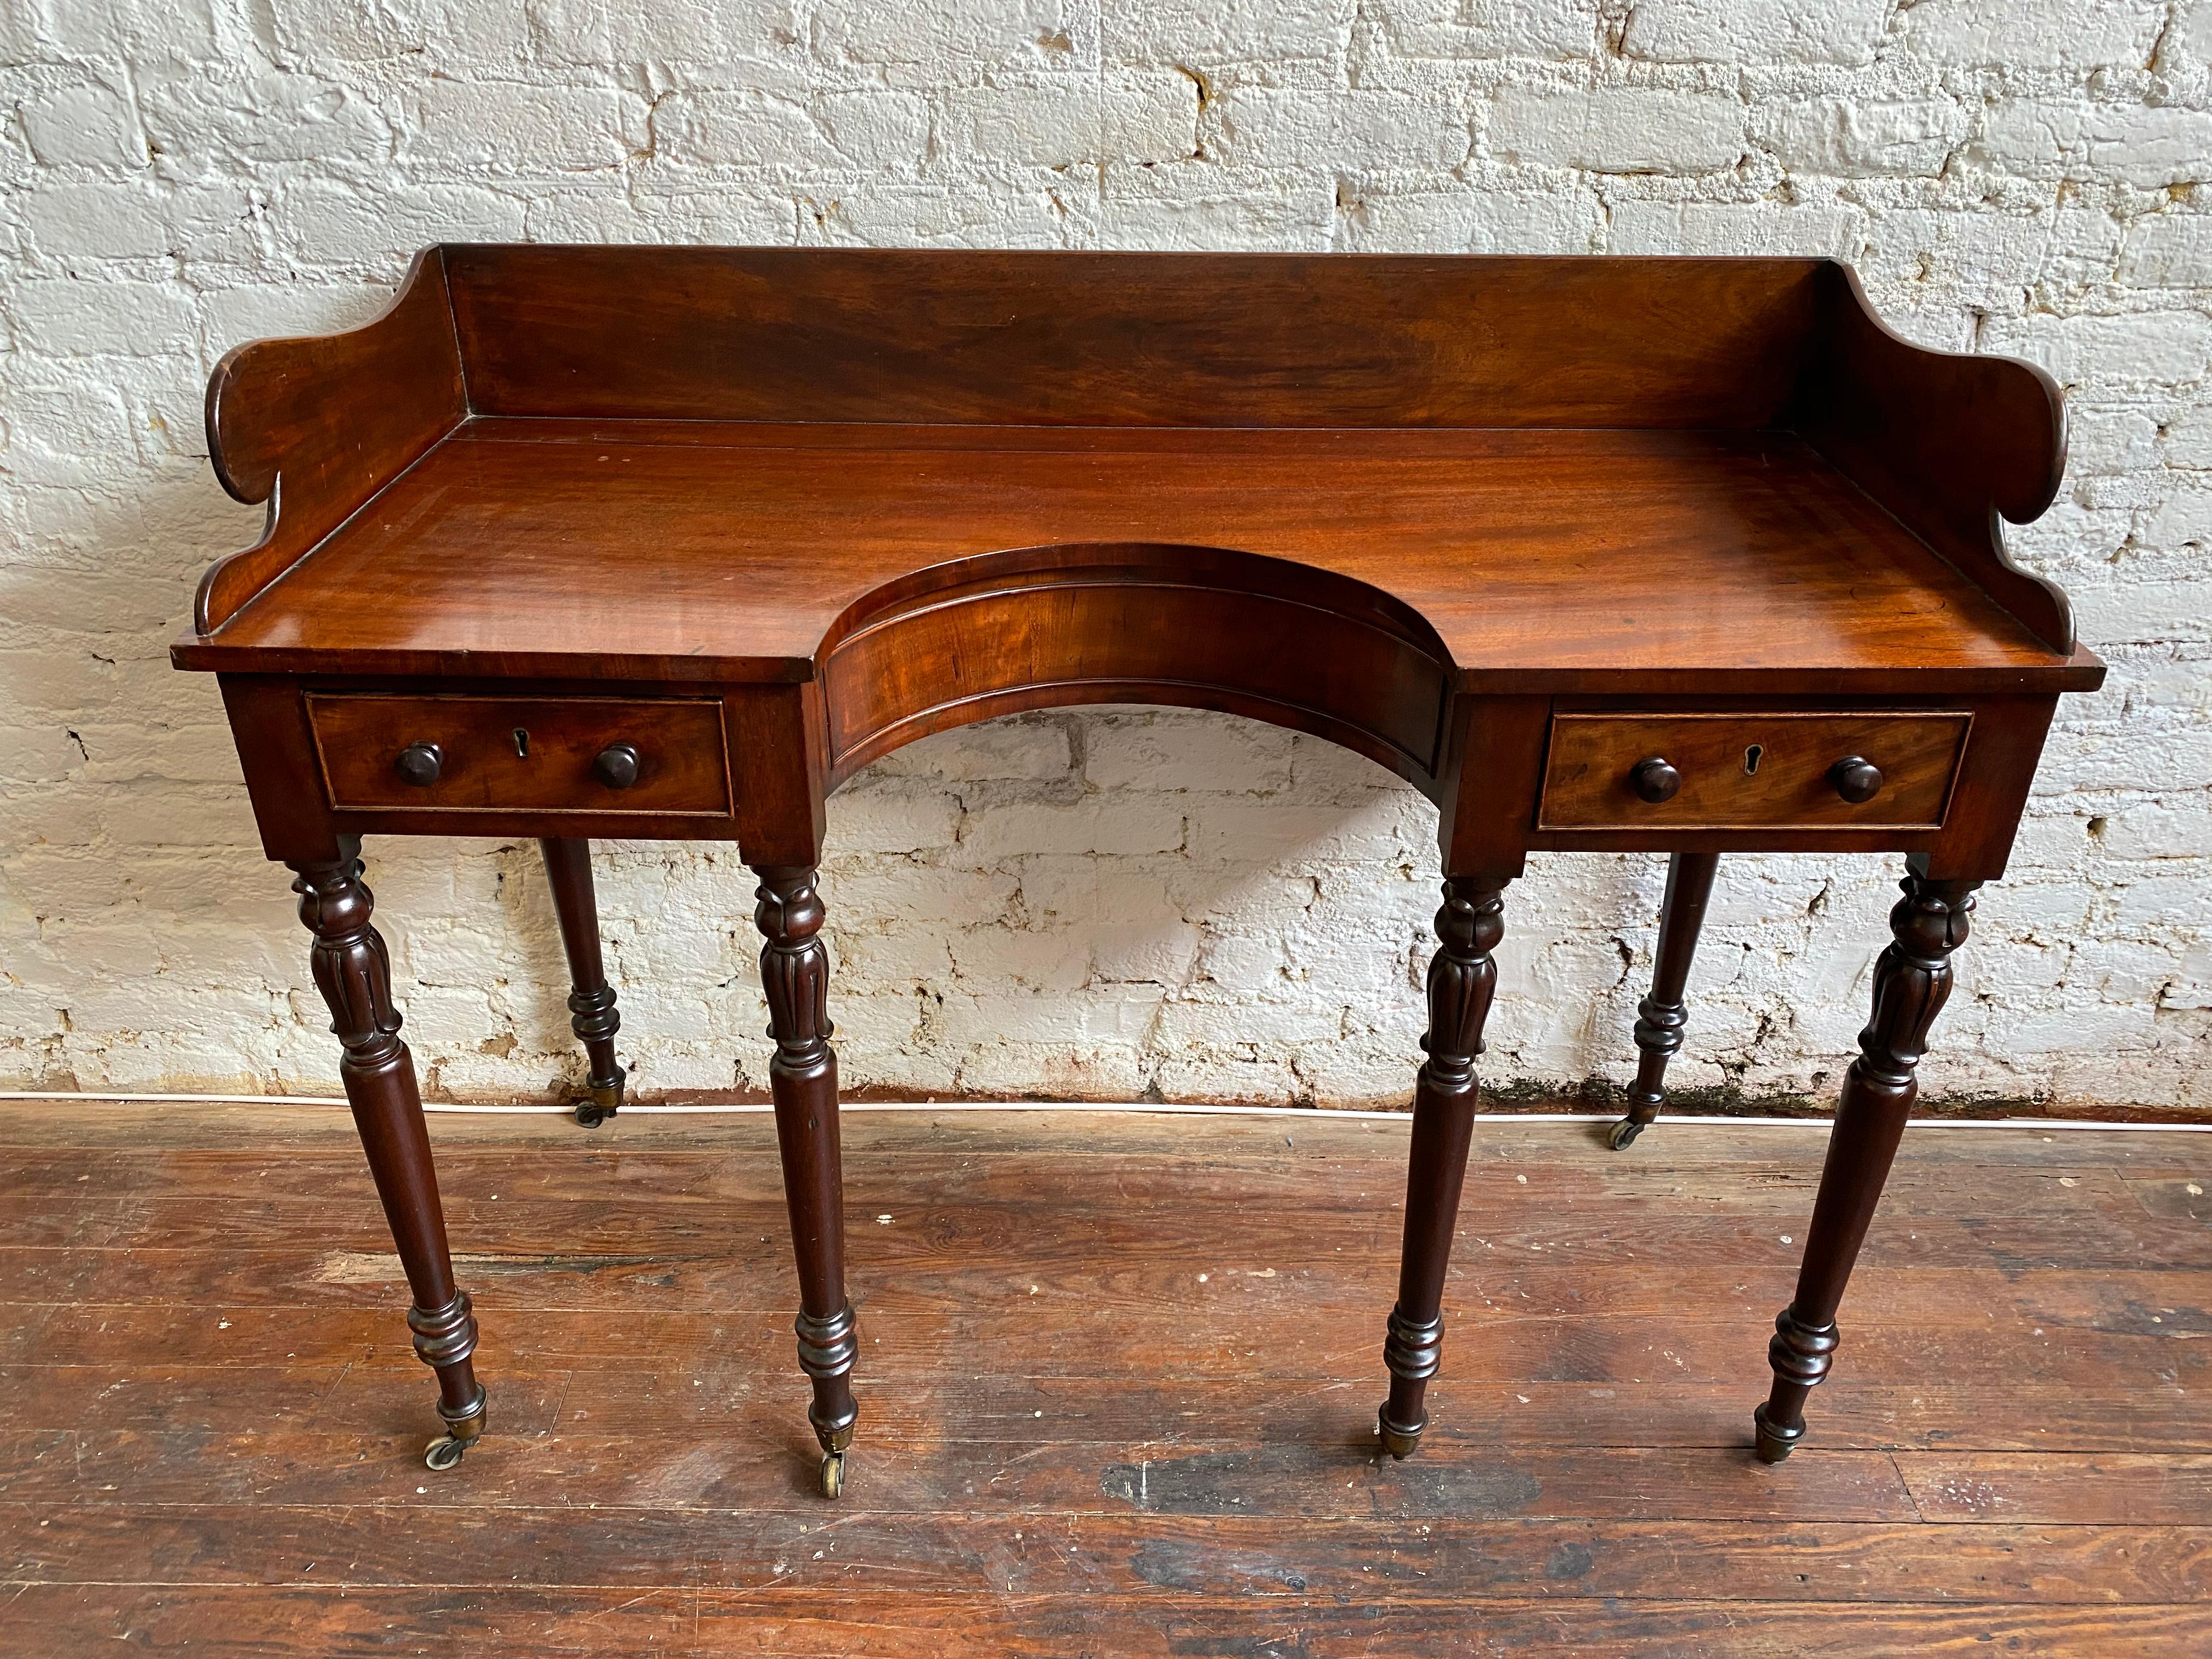 Great size on this 19th century English Regency 6 leg mahogany server. The turned legs have wonderful tulip and lotus carvings and original castors. There are 2 drawers in the frieze and a nice shaped backsplash. The color and patina of the Cuban